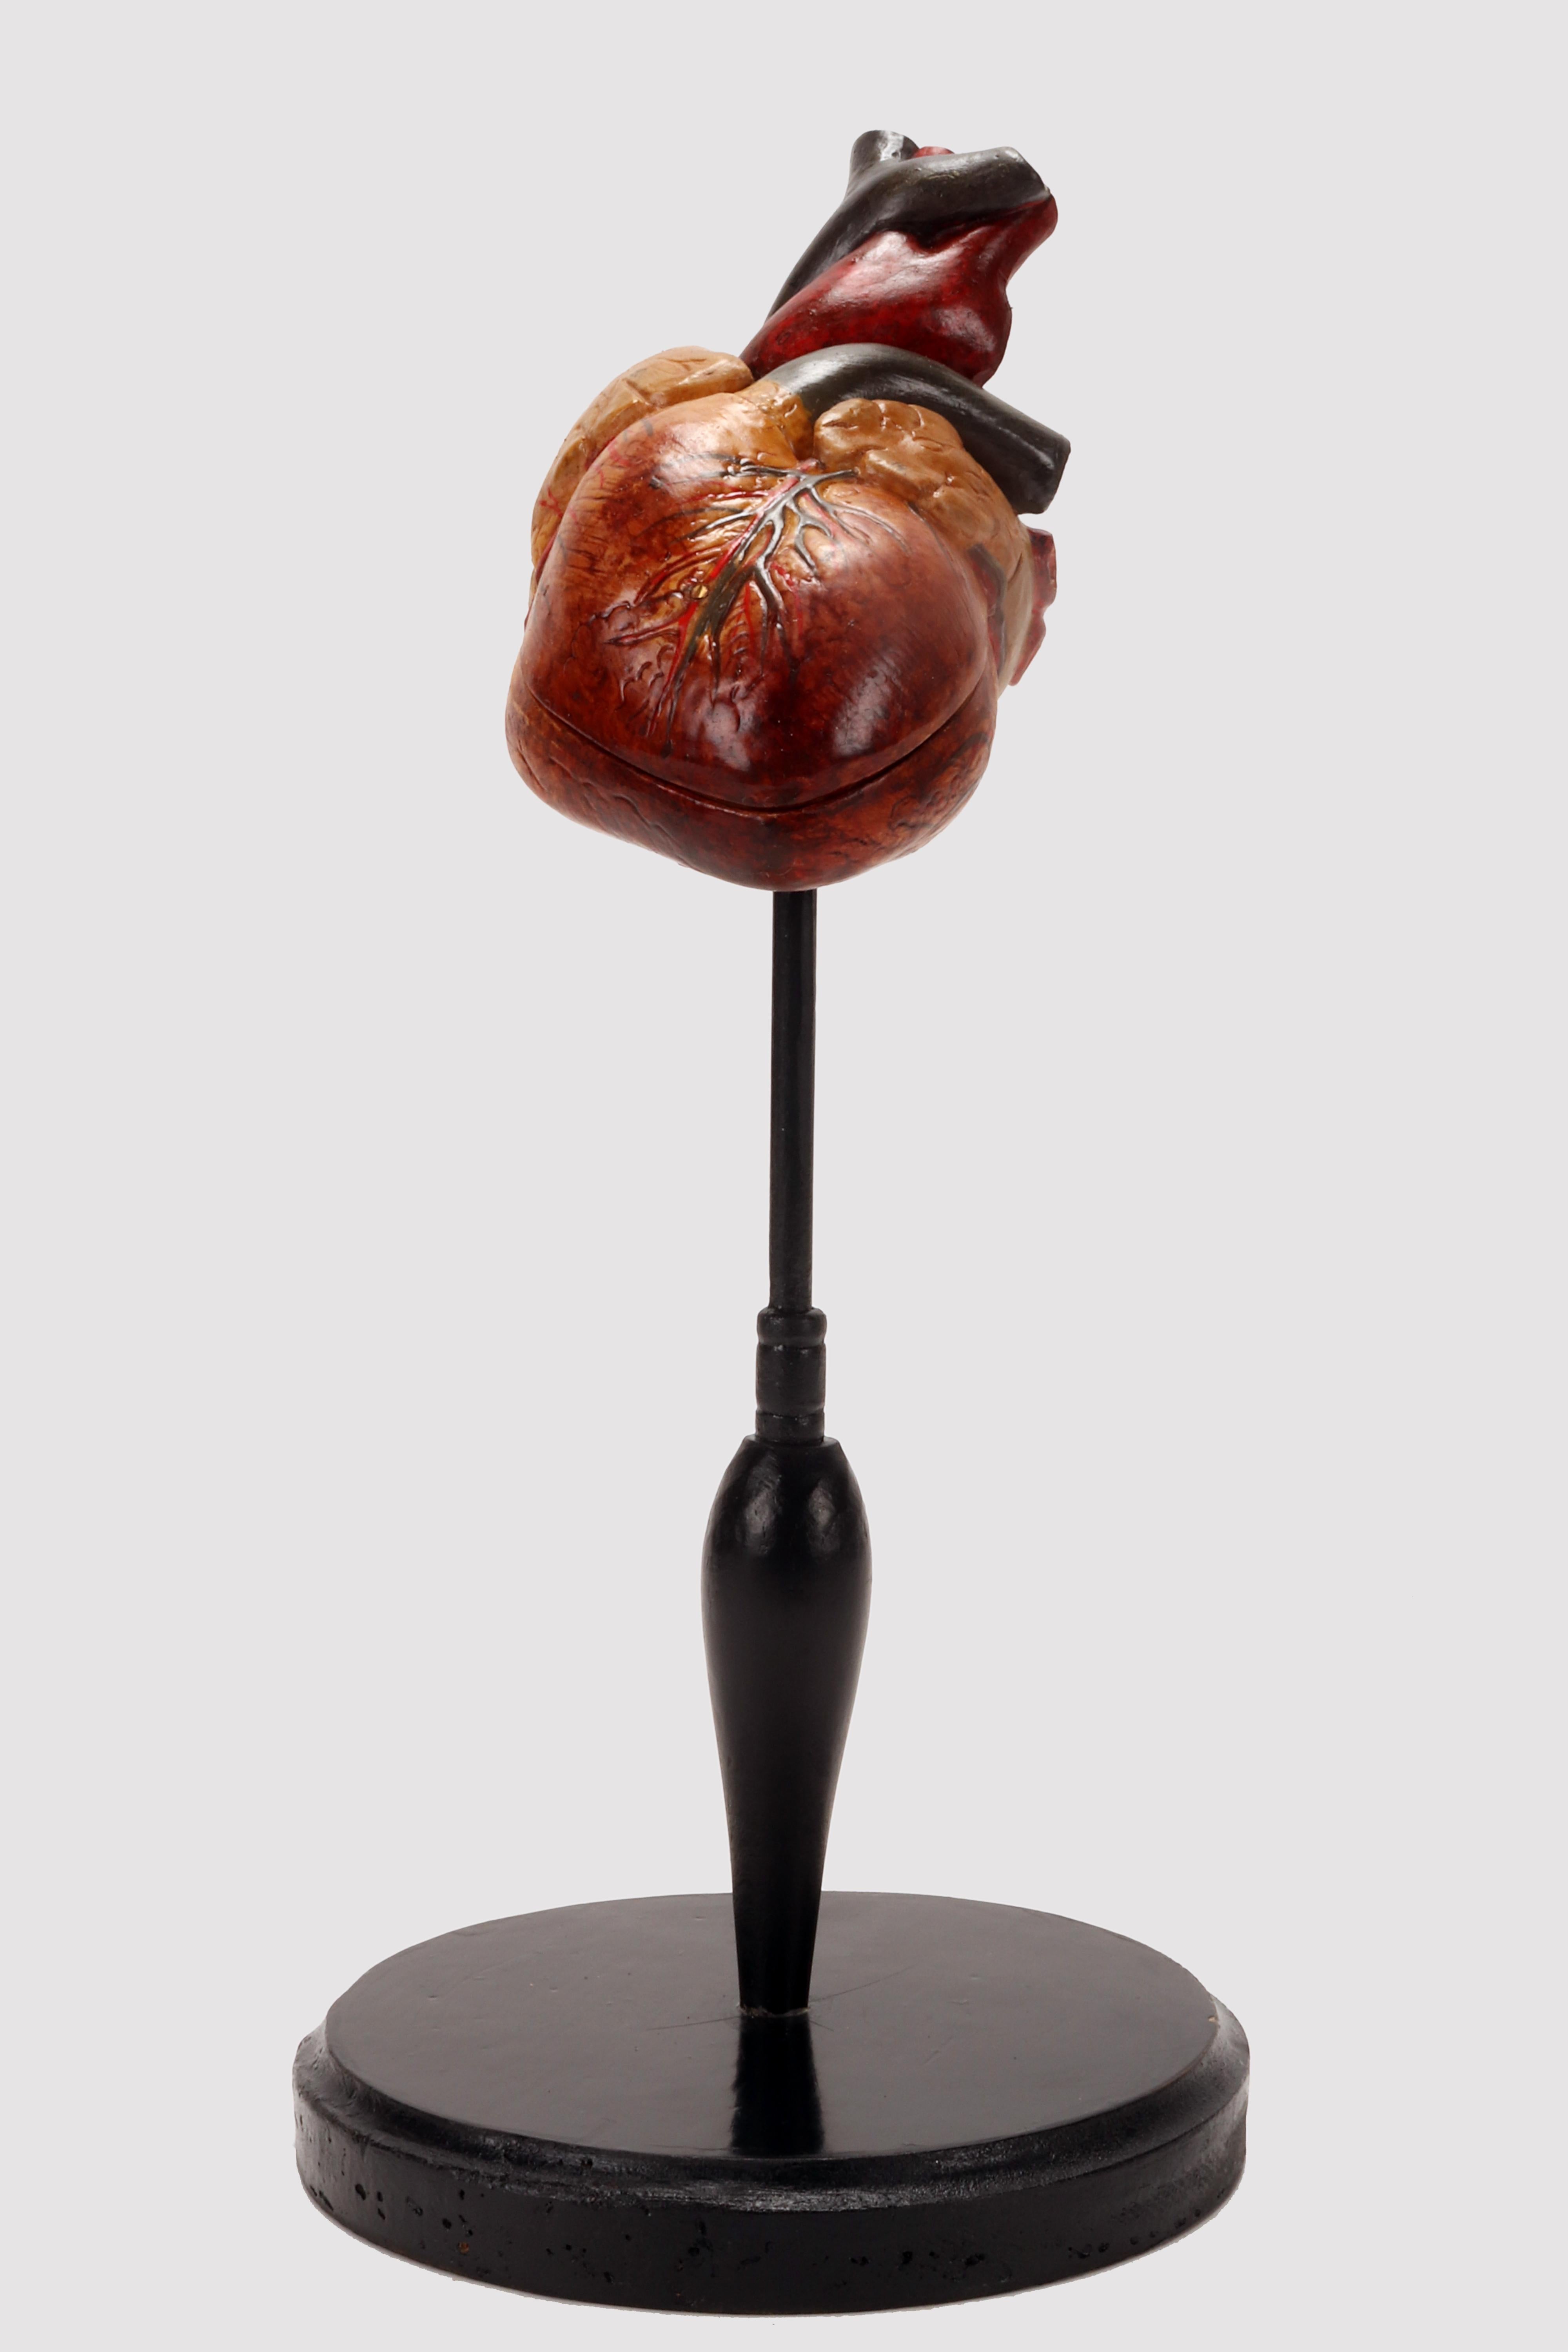 Anatomical demontable model of an human heart made out of painted lattex mounted on a round black wooden base. Germany circa 1950.